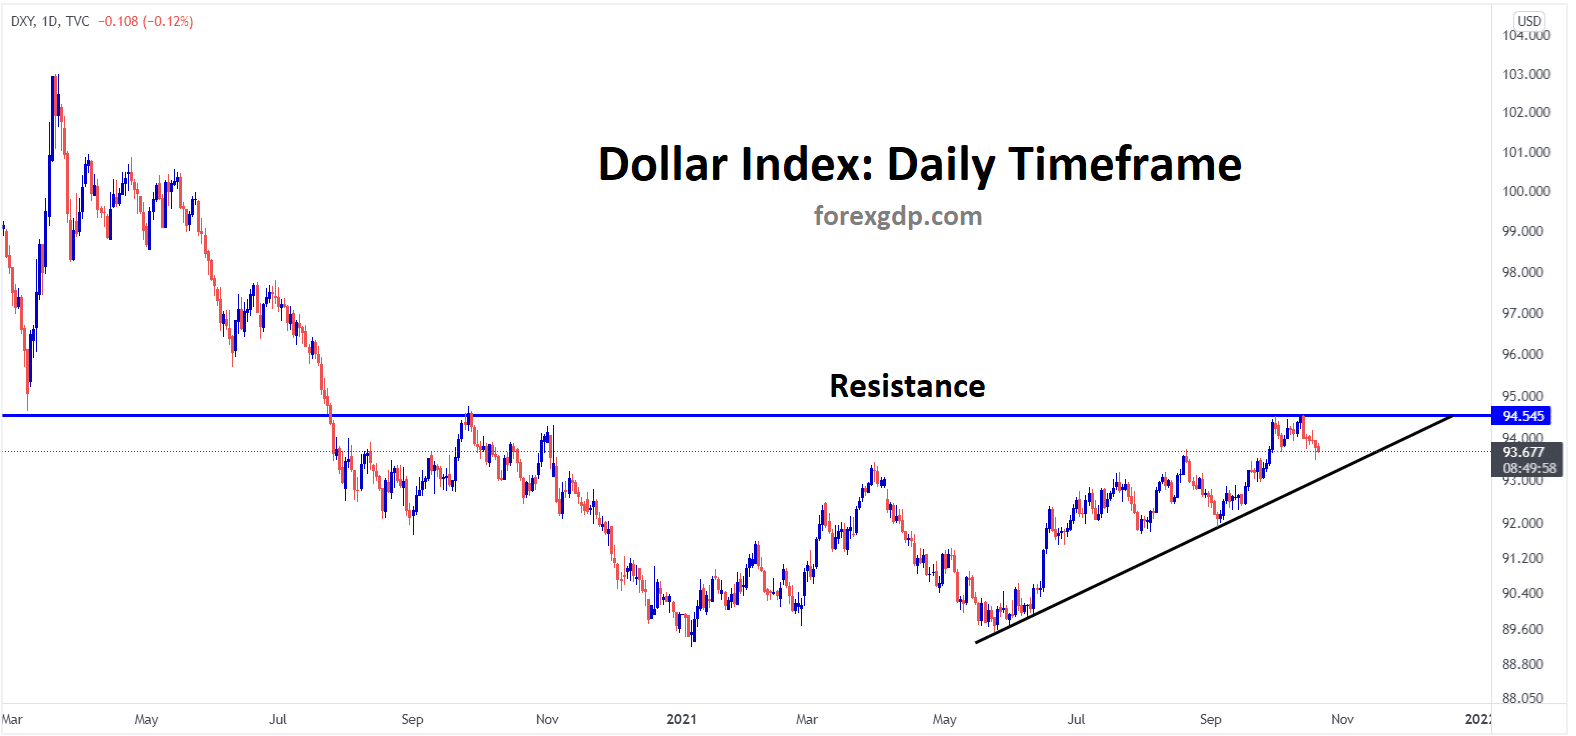 US Dollar Index is making a correction from the horizontal resistance area looks like an Ascending triangle pattern